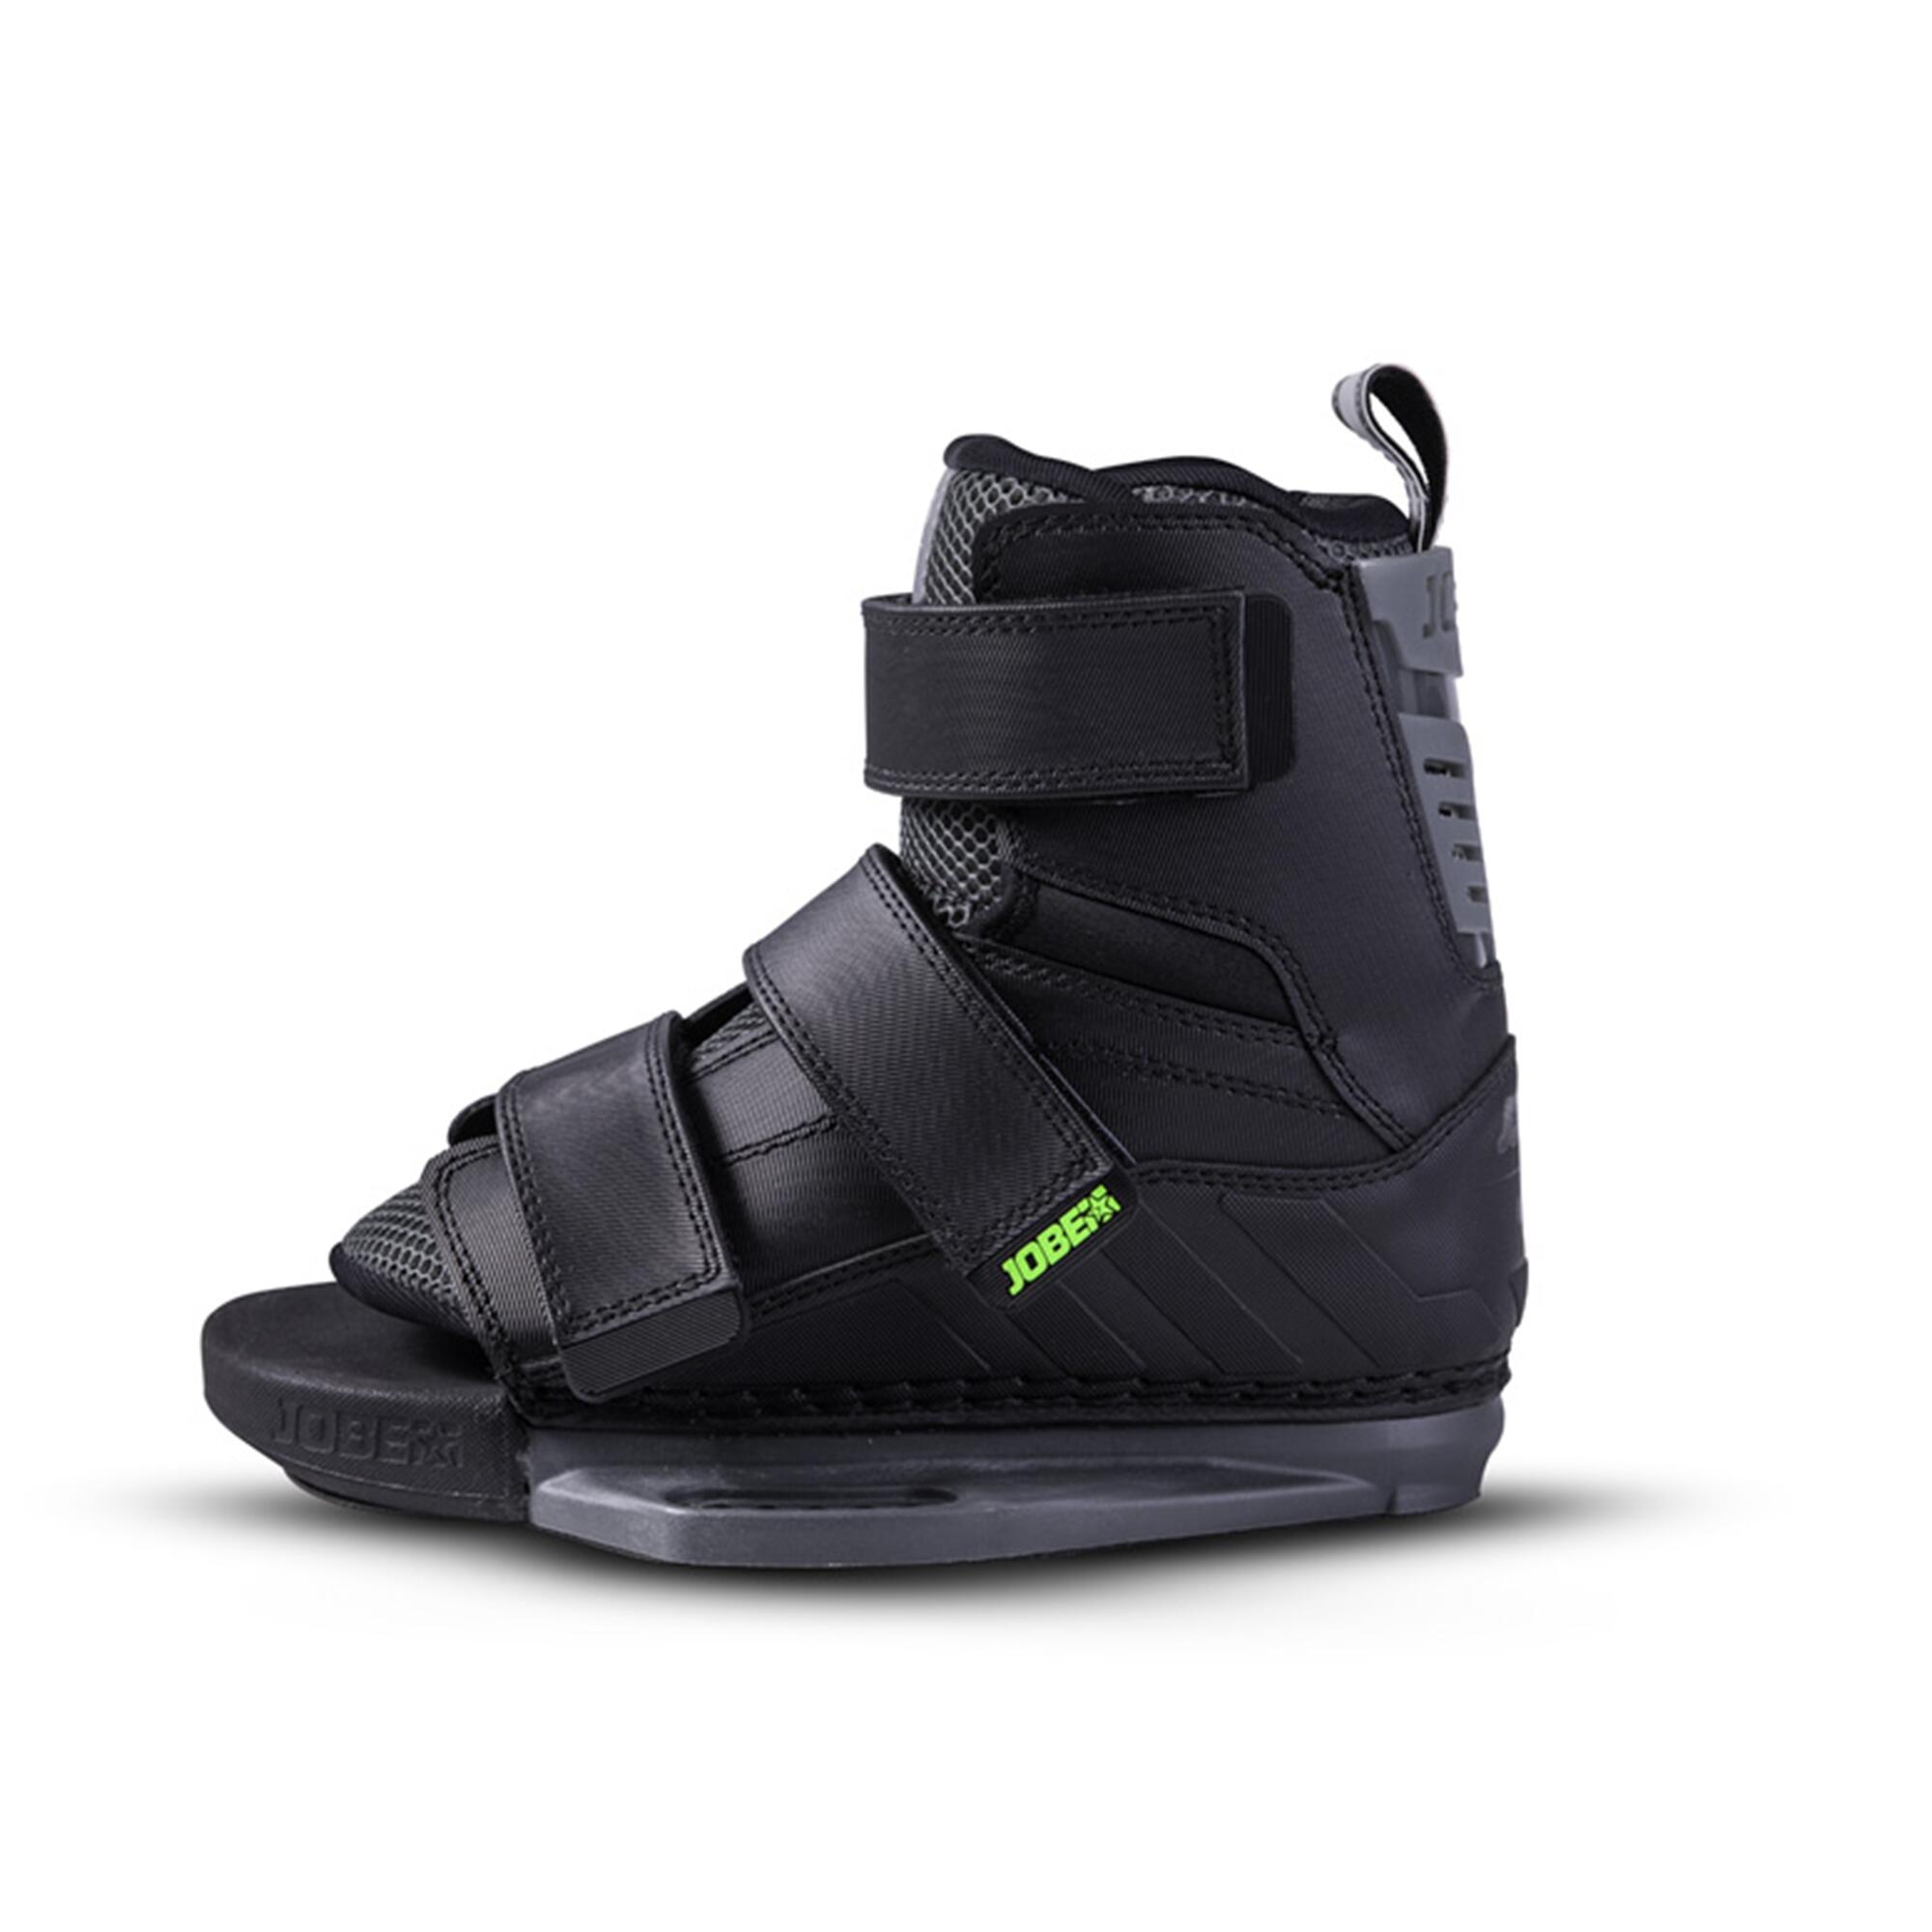 Boots WAKEBOARD decathlon.ro colac tractat